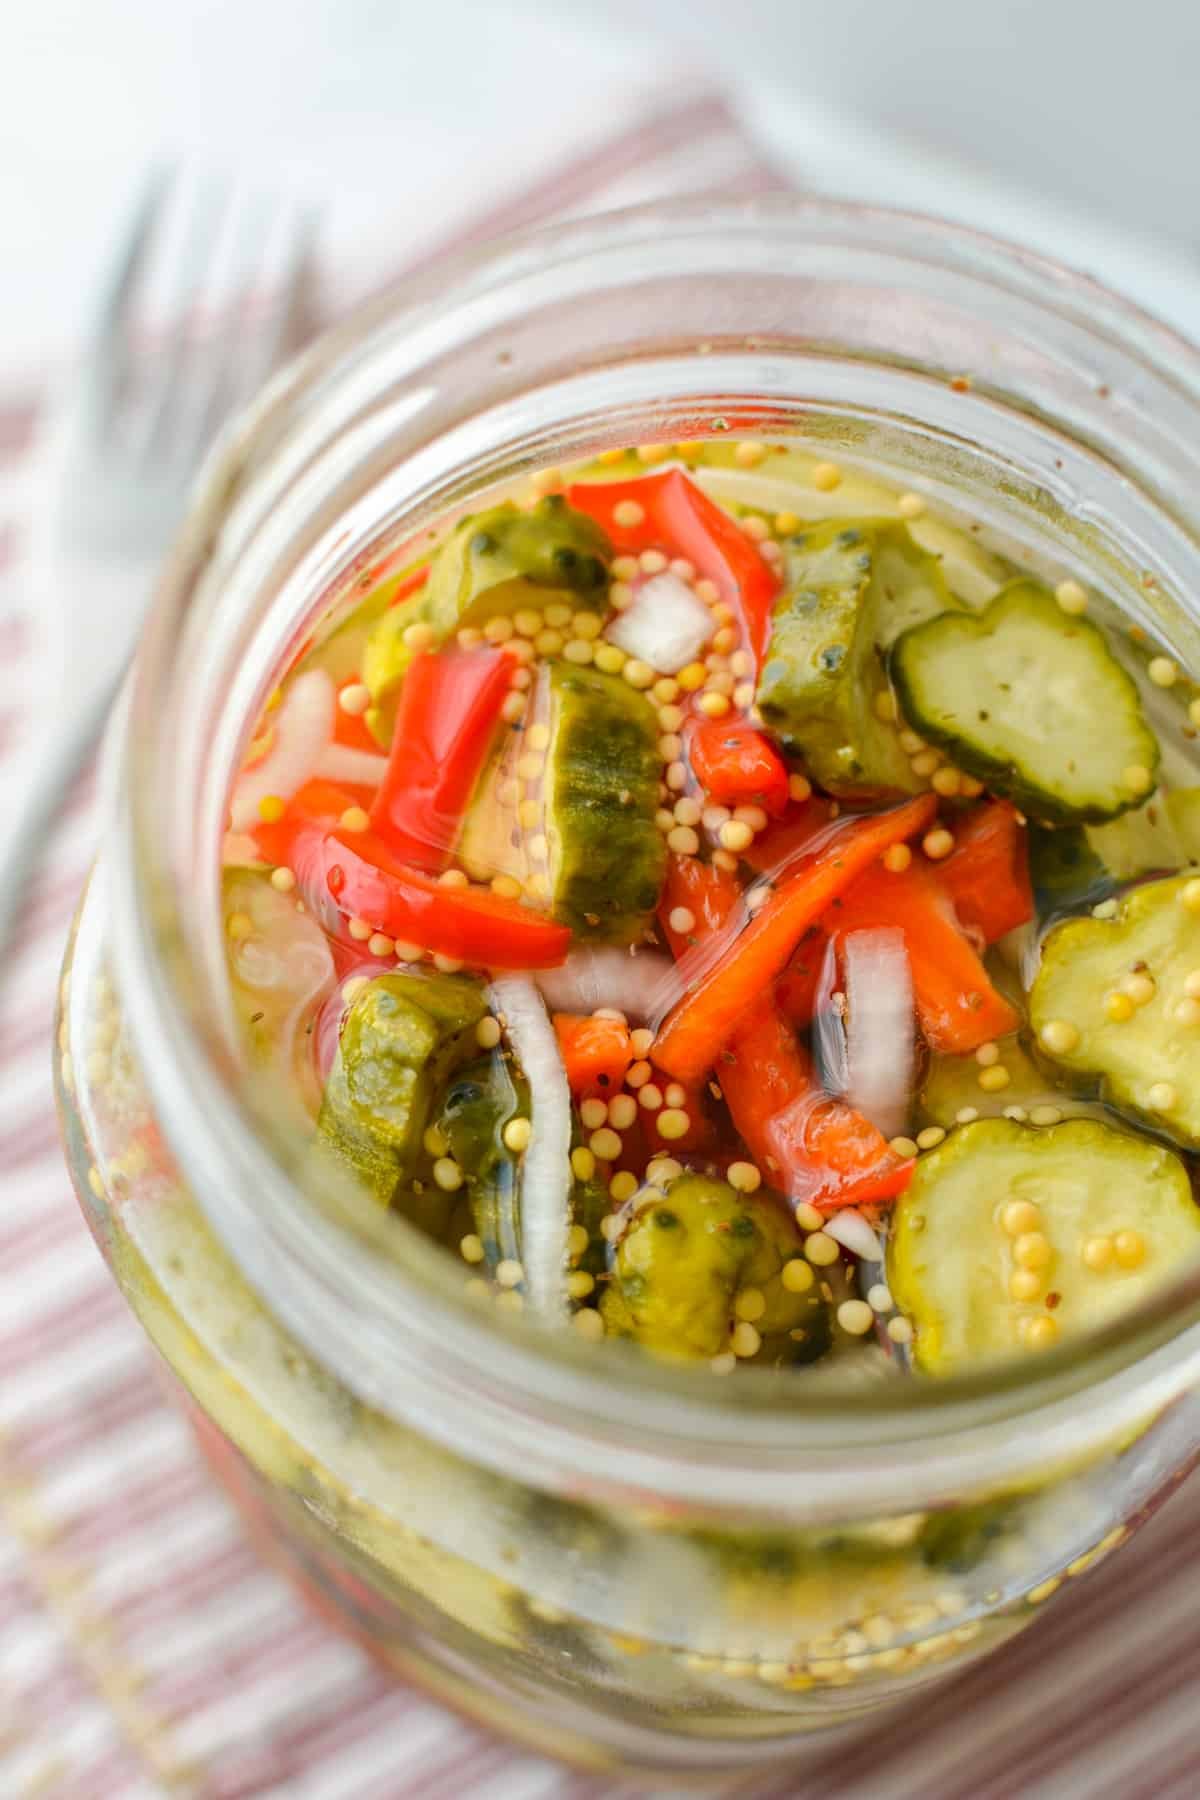 A jar filled with peppers, cucumbers, and onions in a brine.